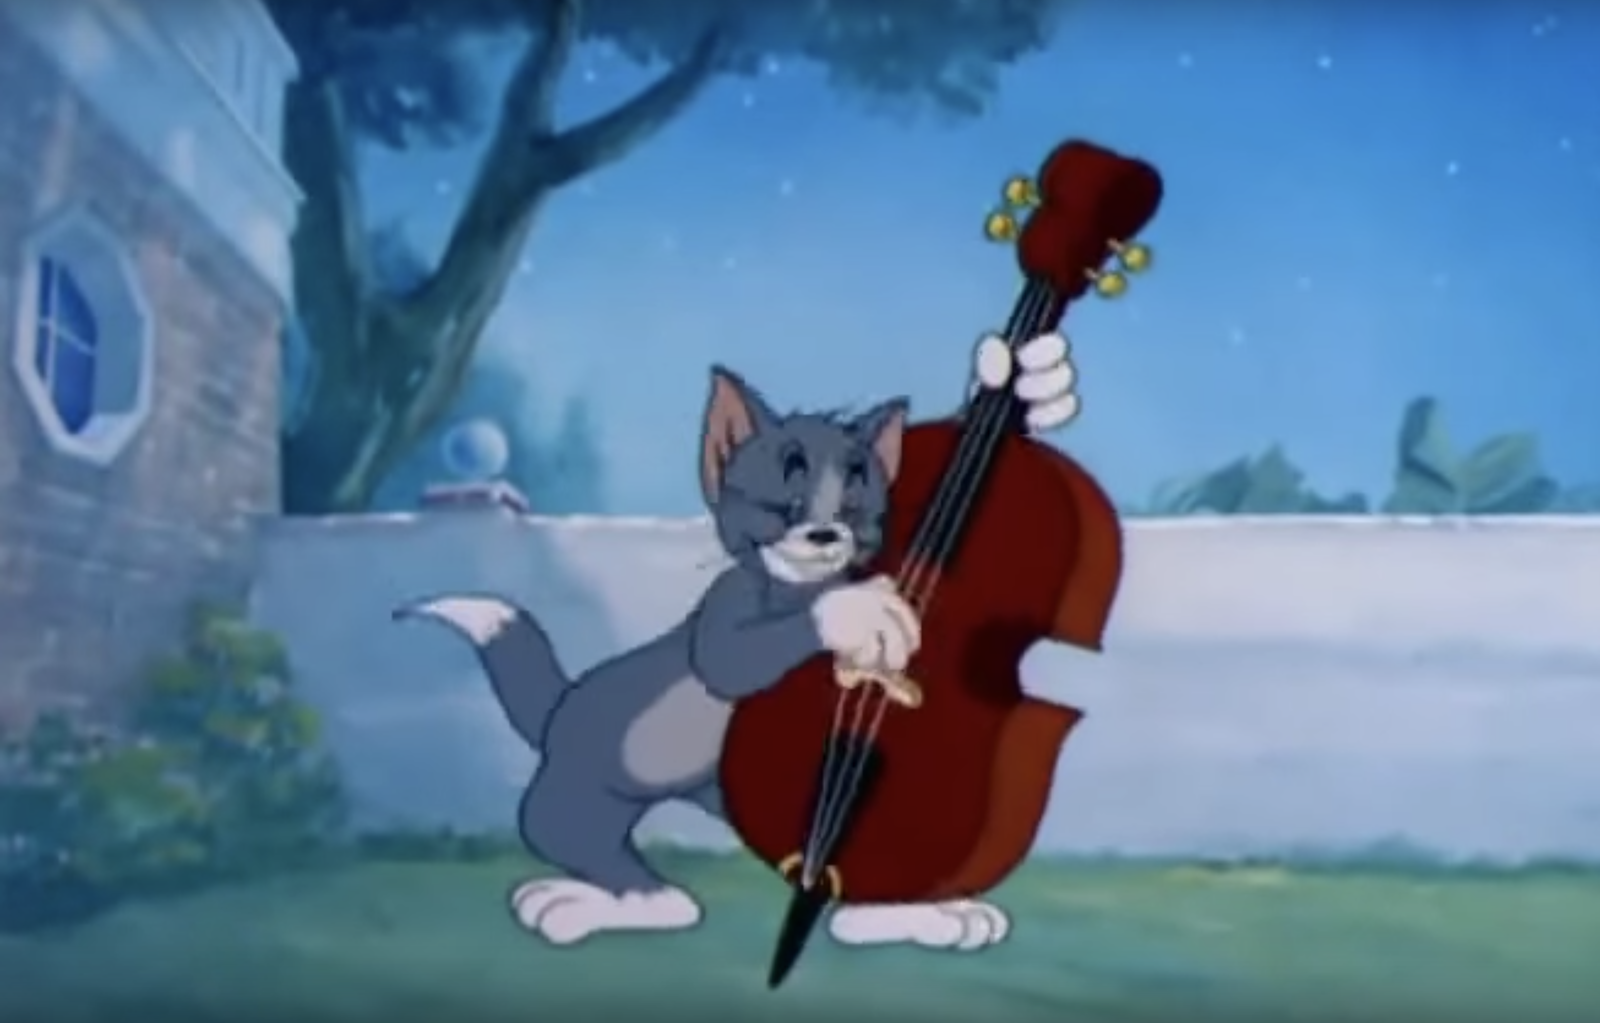 Song from childhood, found it (almost) - Jazz, Tom and Jerry, Music, Classic, Blues, , Frank Sinatra